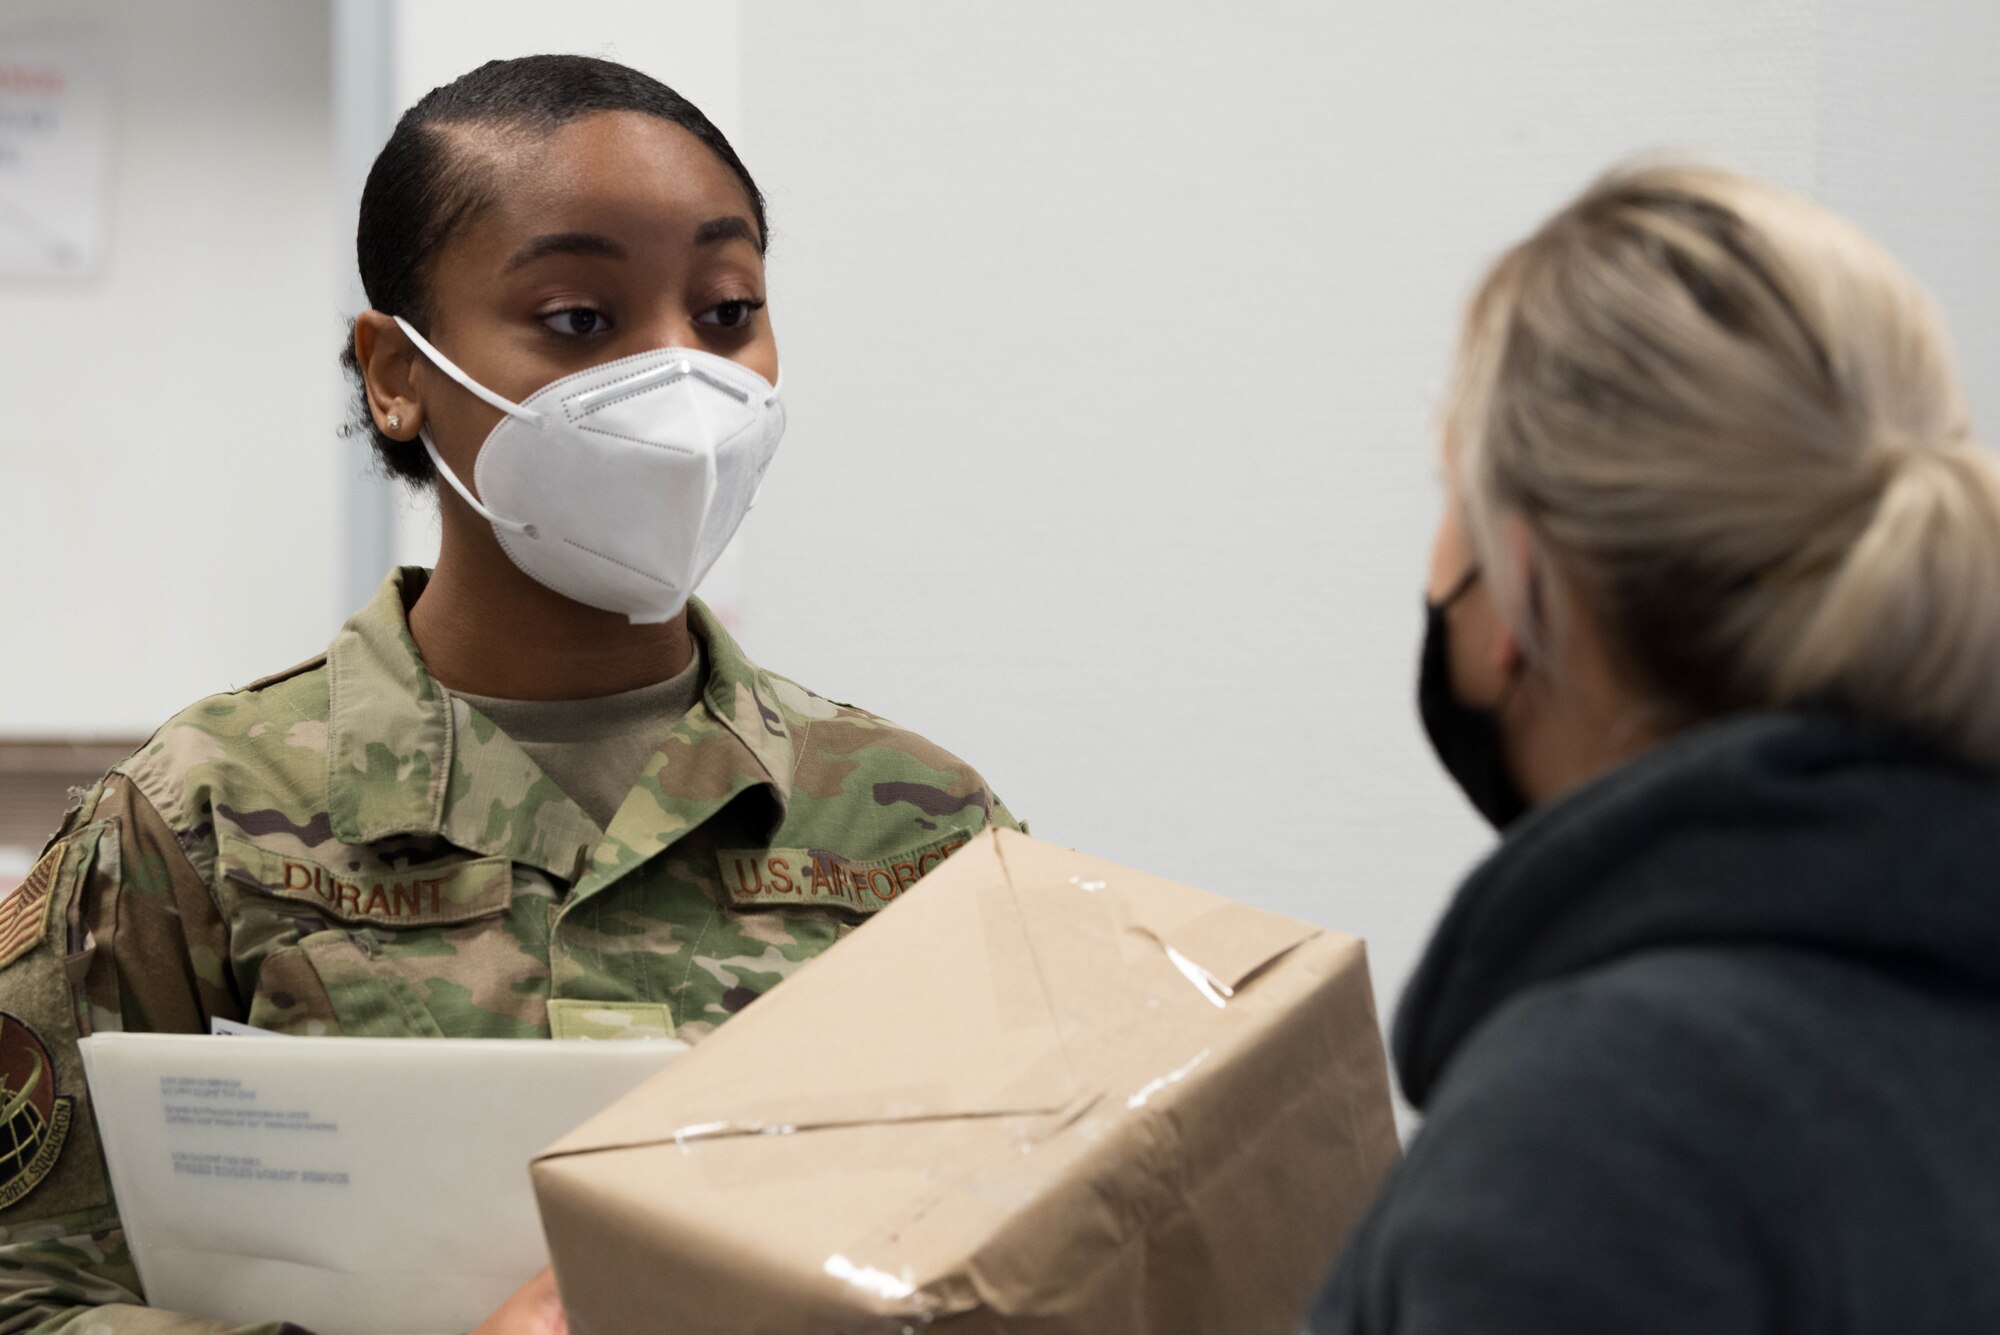 An Airman assists a customer in the Northside Post Office at Ramstein Air Base, Germany.